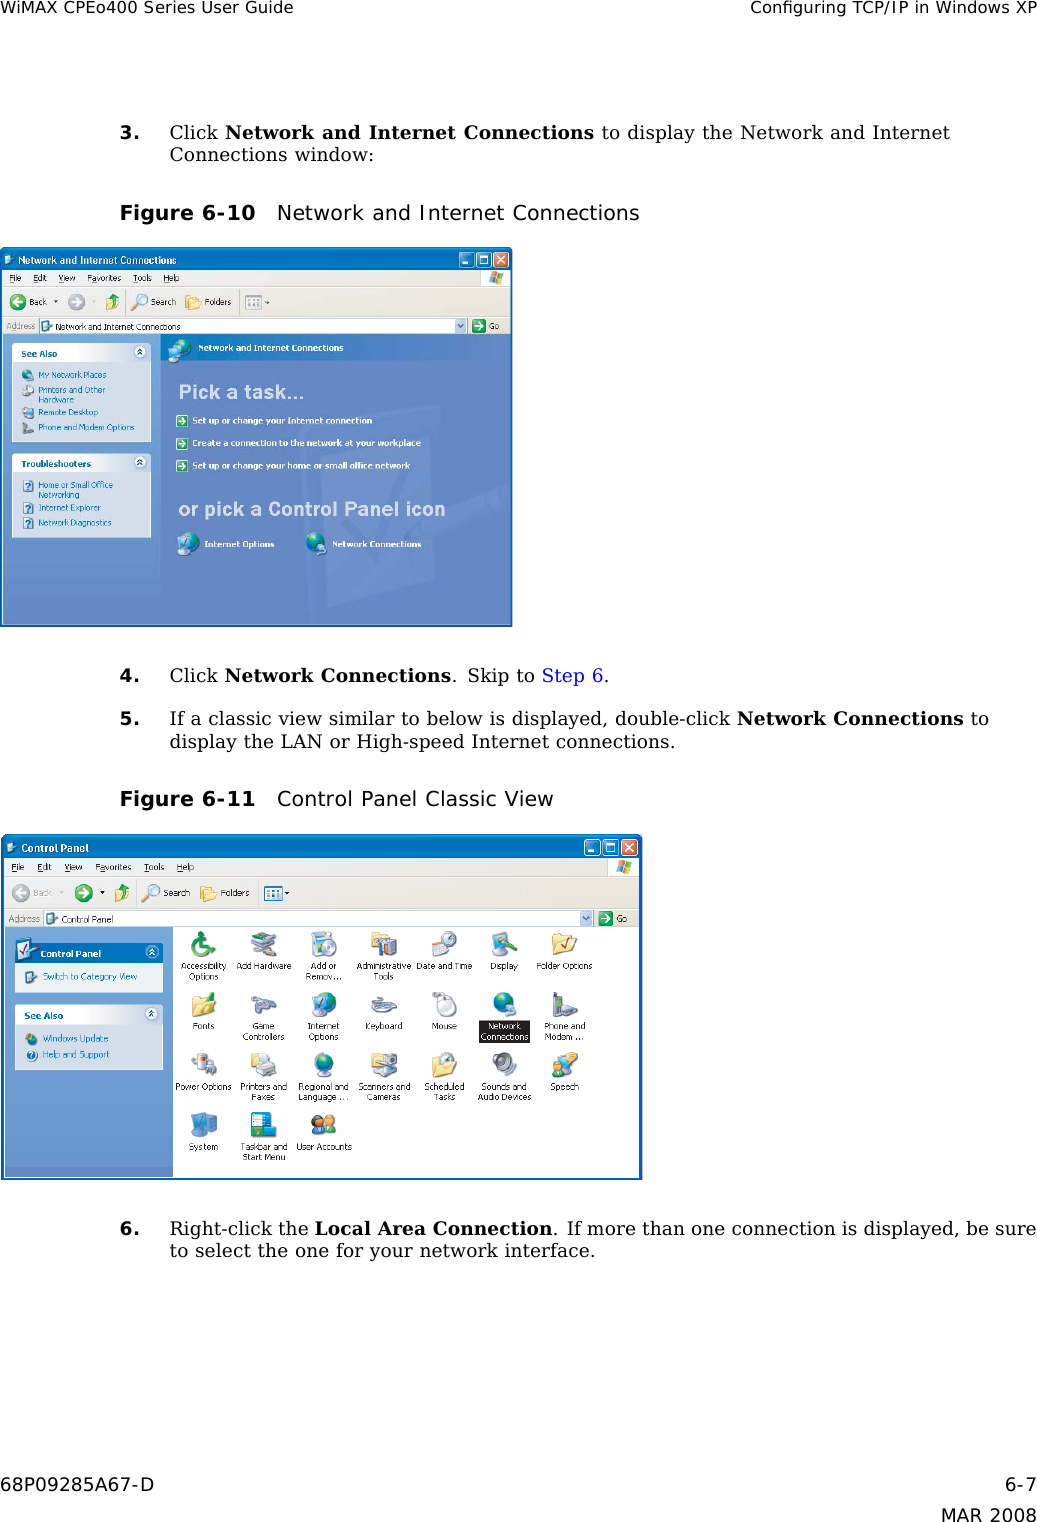 WiMAX CPEo400 Series User Guide Conﬁguring TCP/IP in Windows XP3. Click Network and Internet Connections to display the Network and InternetConnections window:Figure 6-10 Network and Internet Connections4. Click Network Connections.SkiptoStep 6.5. If a classic view similar to below is displayed, double-click Network Connections todisplay the LAN or High-speed Internet connections.Figure 6-11 Control Panel Classic View6. Right-click the Local Area Connection. If more than one connection is displayed, be suretoselecttheoneforyournetworkinterface.68P09285A67-D 6-7MAR 2008